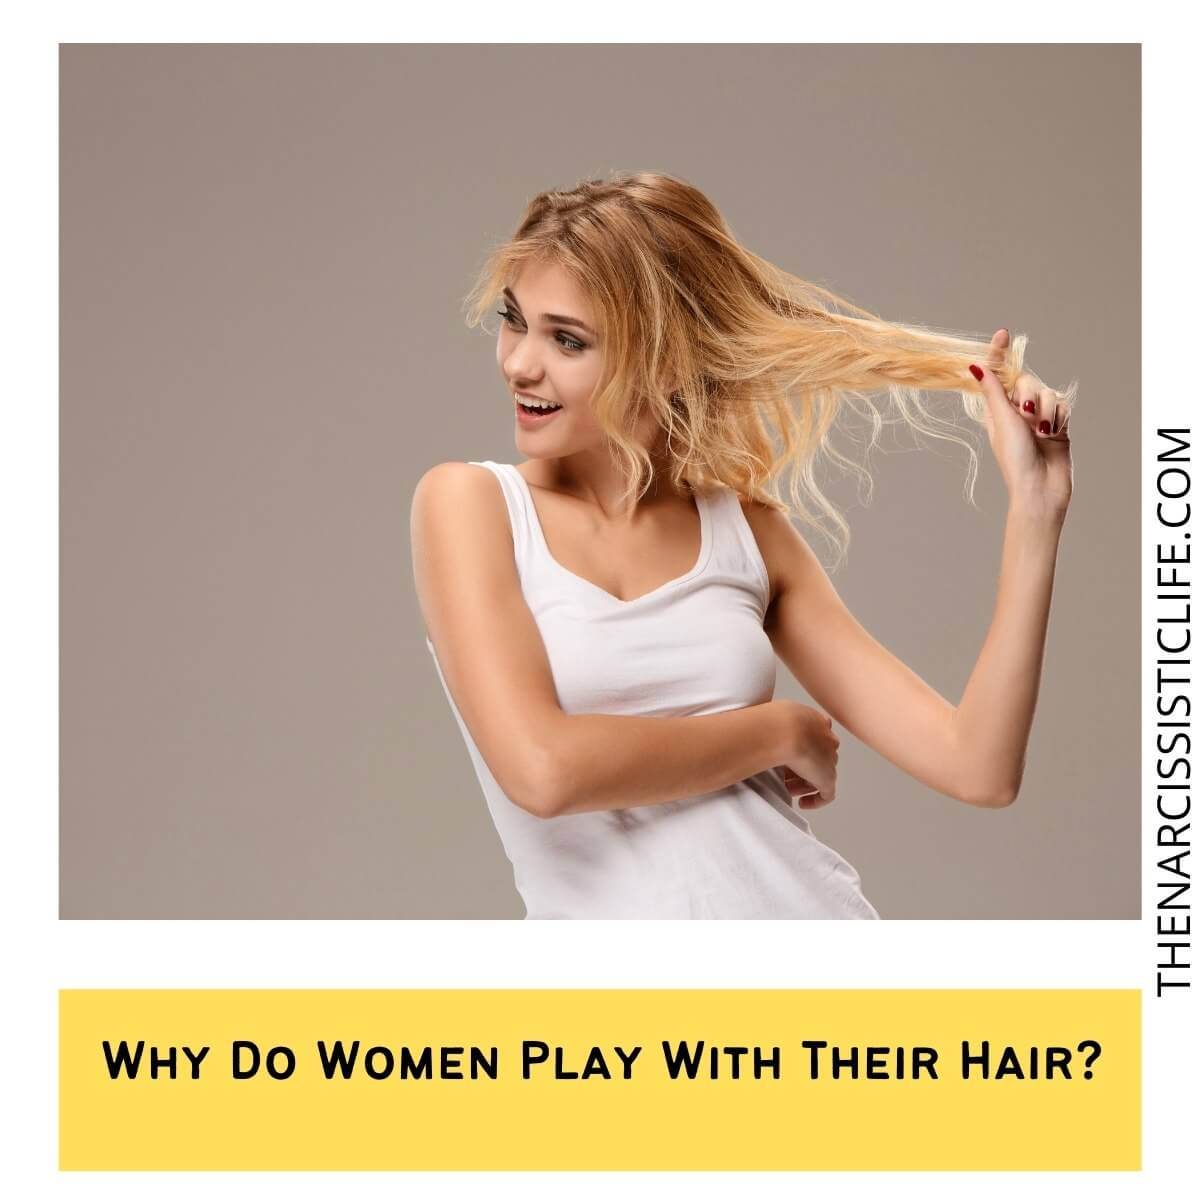 What Does it Mean When Girls Play With Their Hair? - The Narcissistic Life